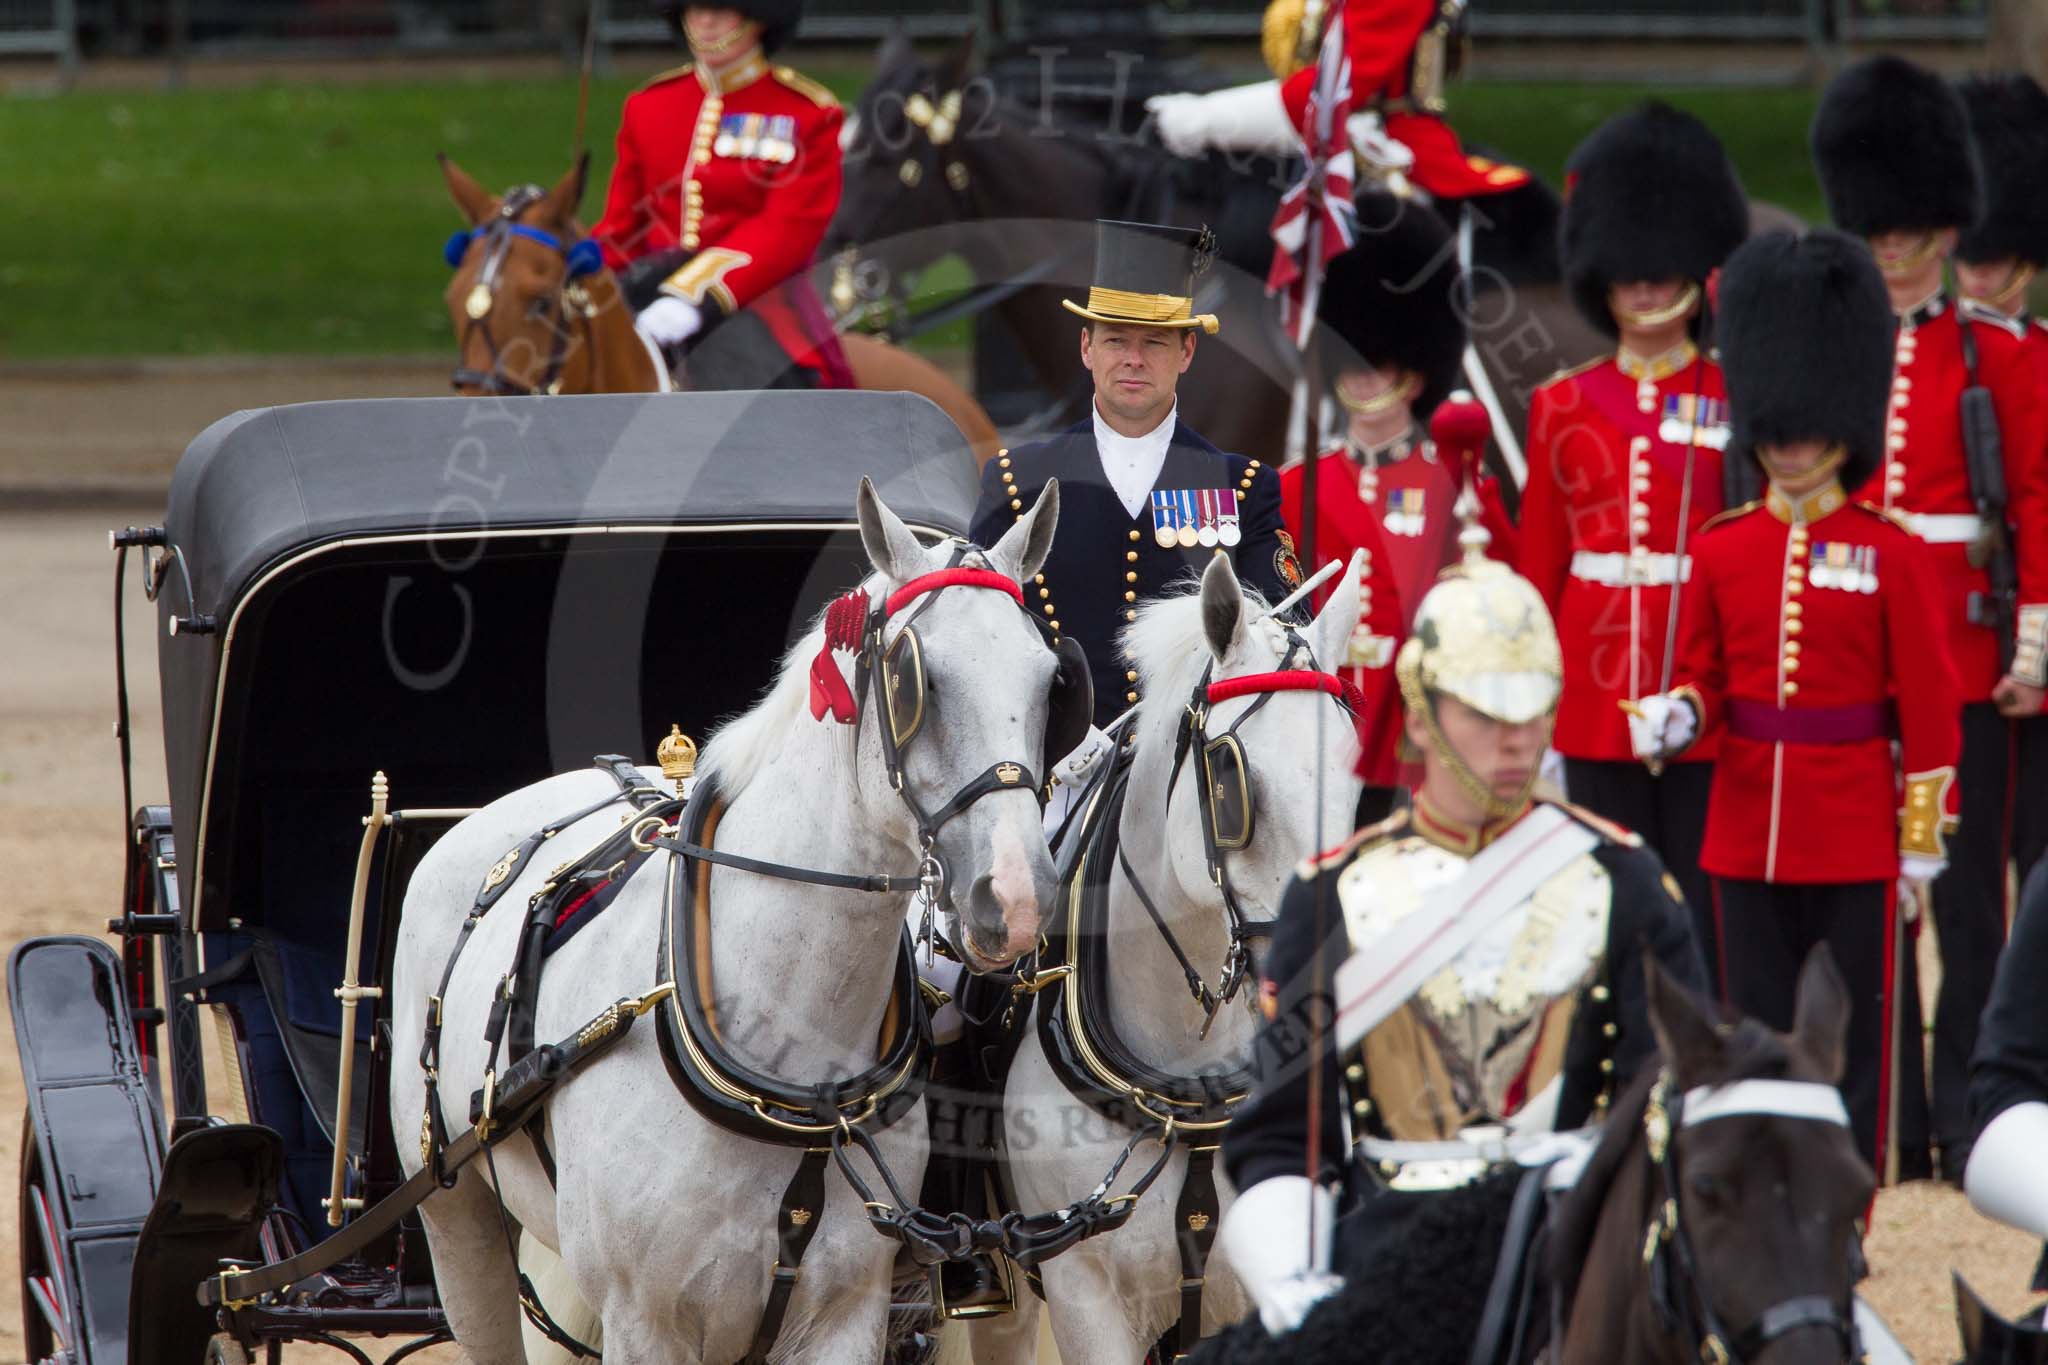 The Colonel's Review 2012: Head Coachman Jack Hargreaves with the two Windsor Grey horses and the carriage representing the Ivory Mounted Phaeton carrying HM The Queen..
Horse Guards Parade, Westminster,
London SW1,

United Kingdom,
on 09 June 2012 at 11:04, image #191